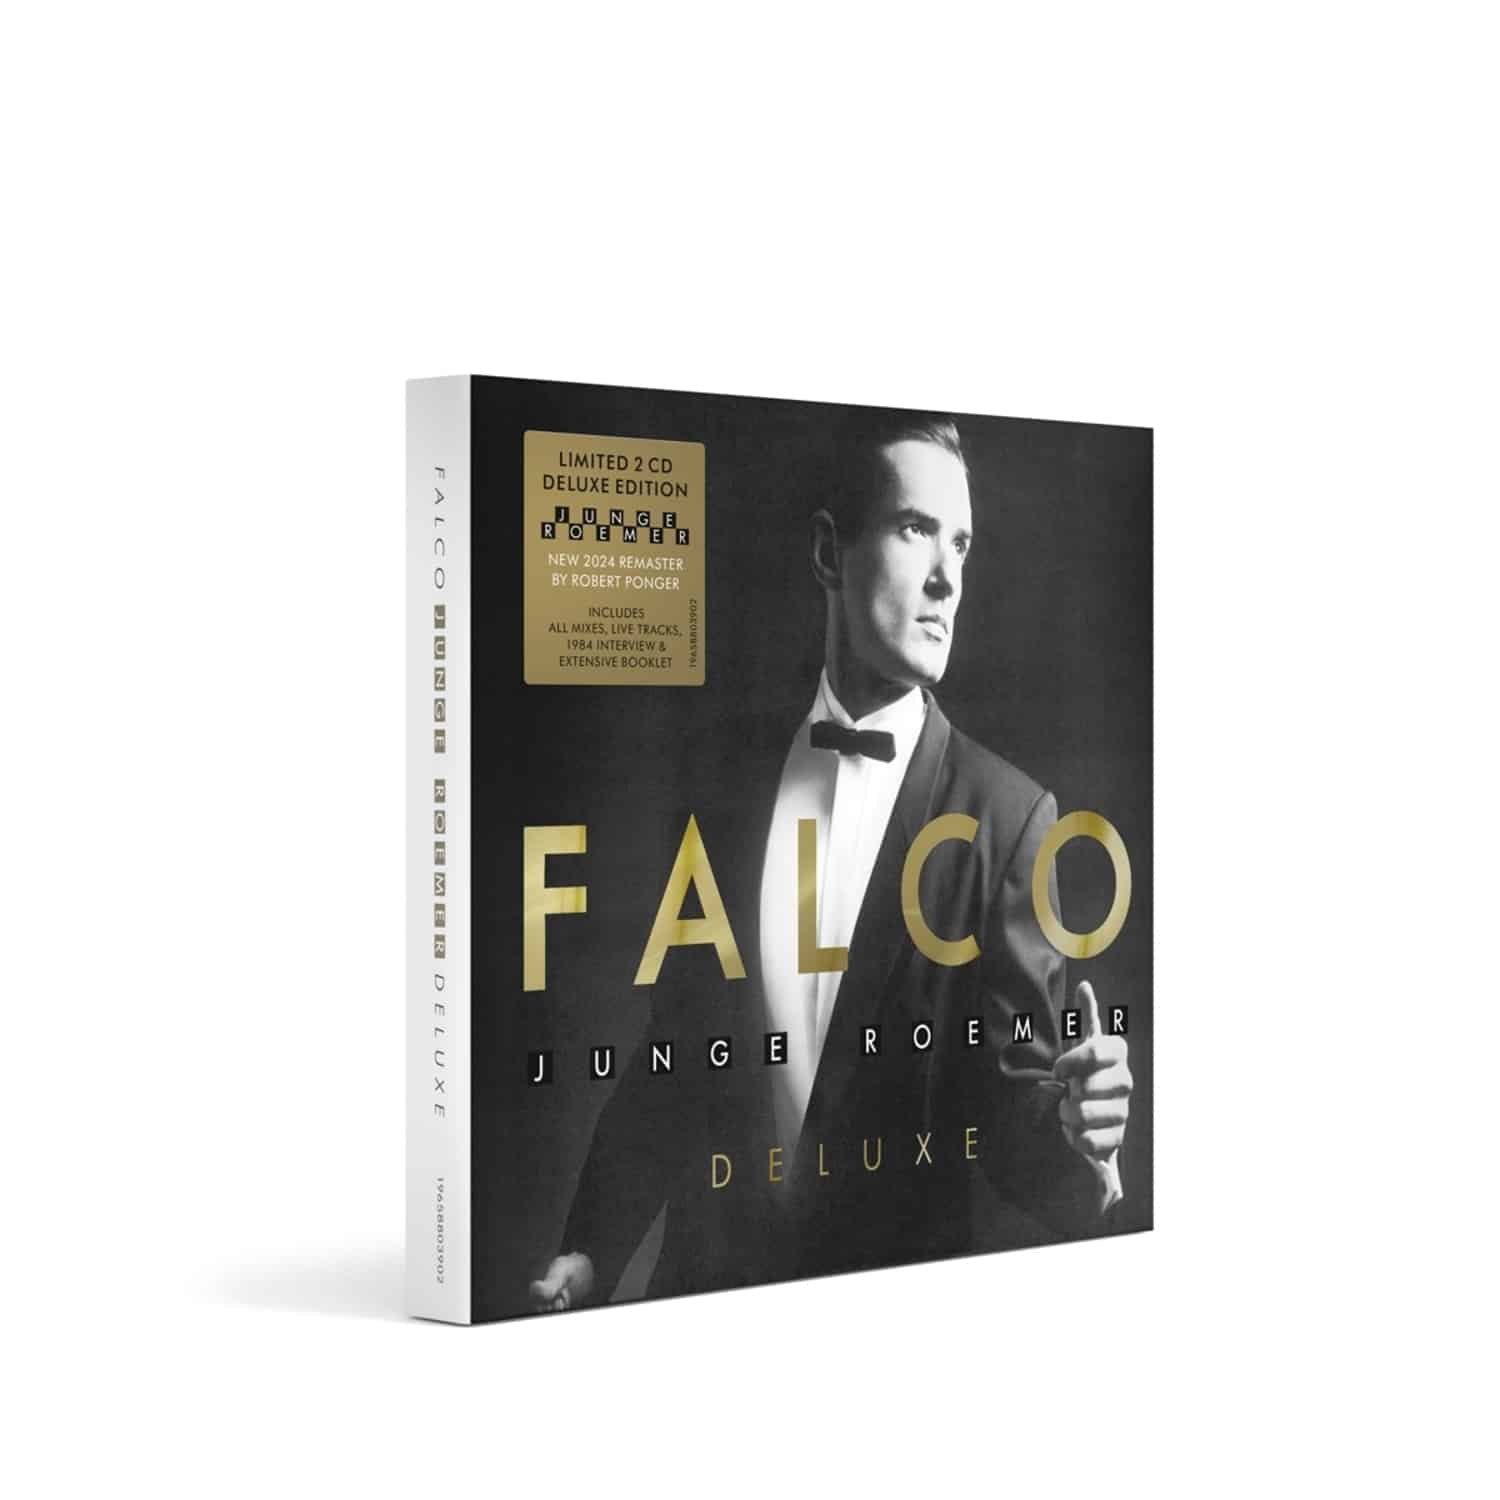 Falco - JUNGE ROEMER - DELUXE EDITION 